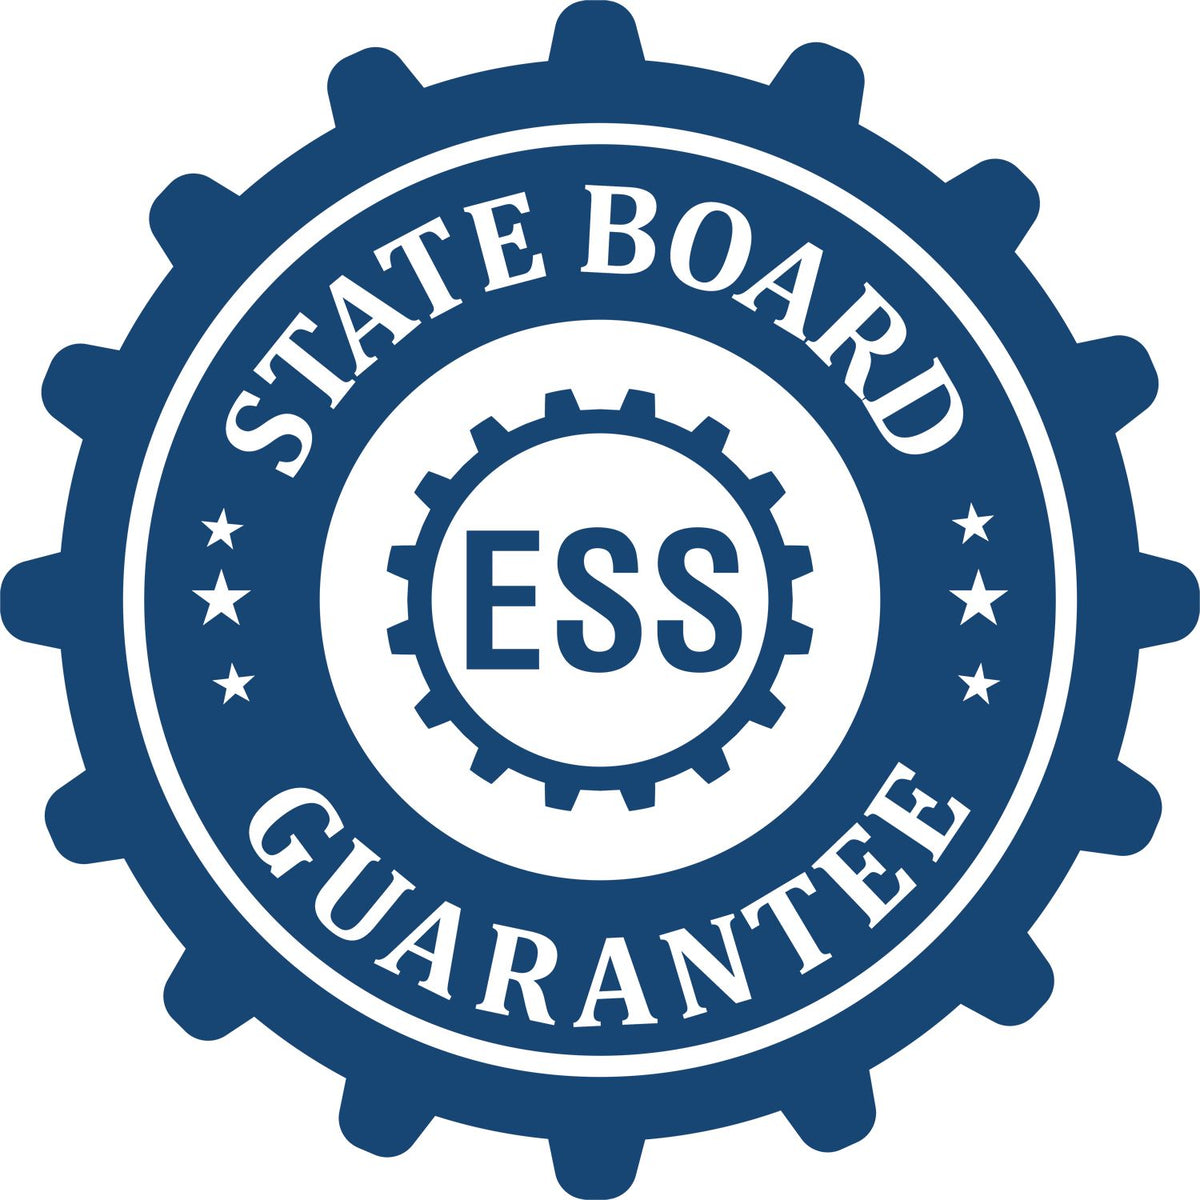 An emblem in a gear shape illustrating a state board guarantee for the Soft Arizona Professional Engineer Seal product.